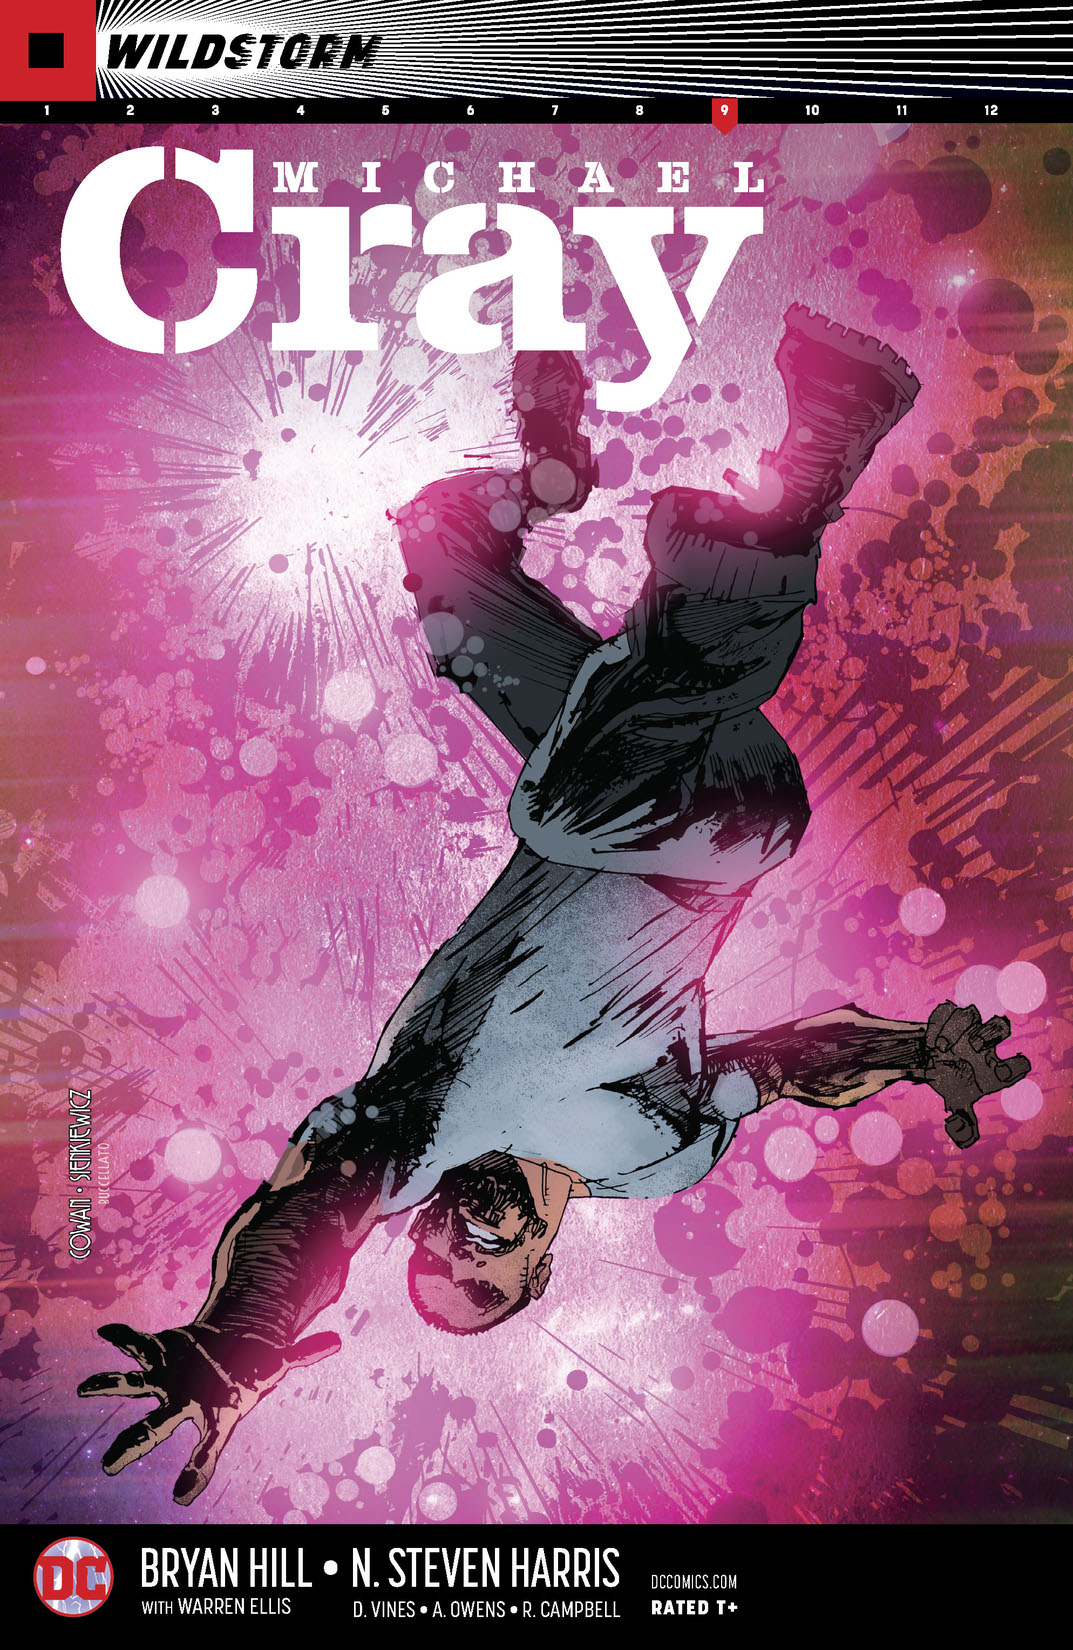 The Wild Storm: Michael Cray #9 preview images